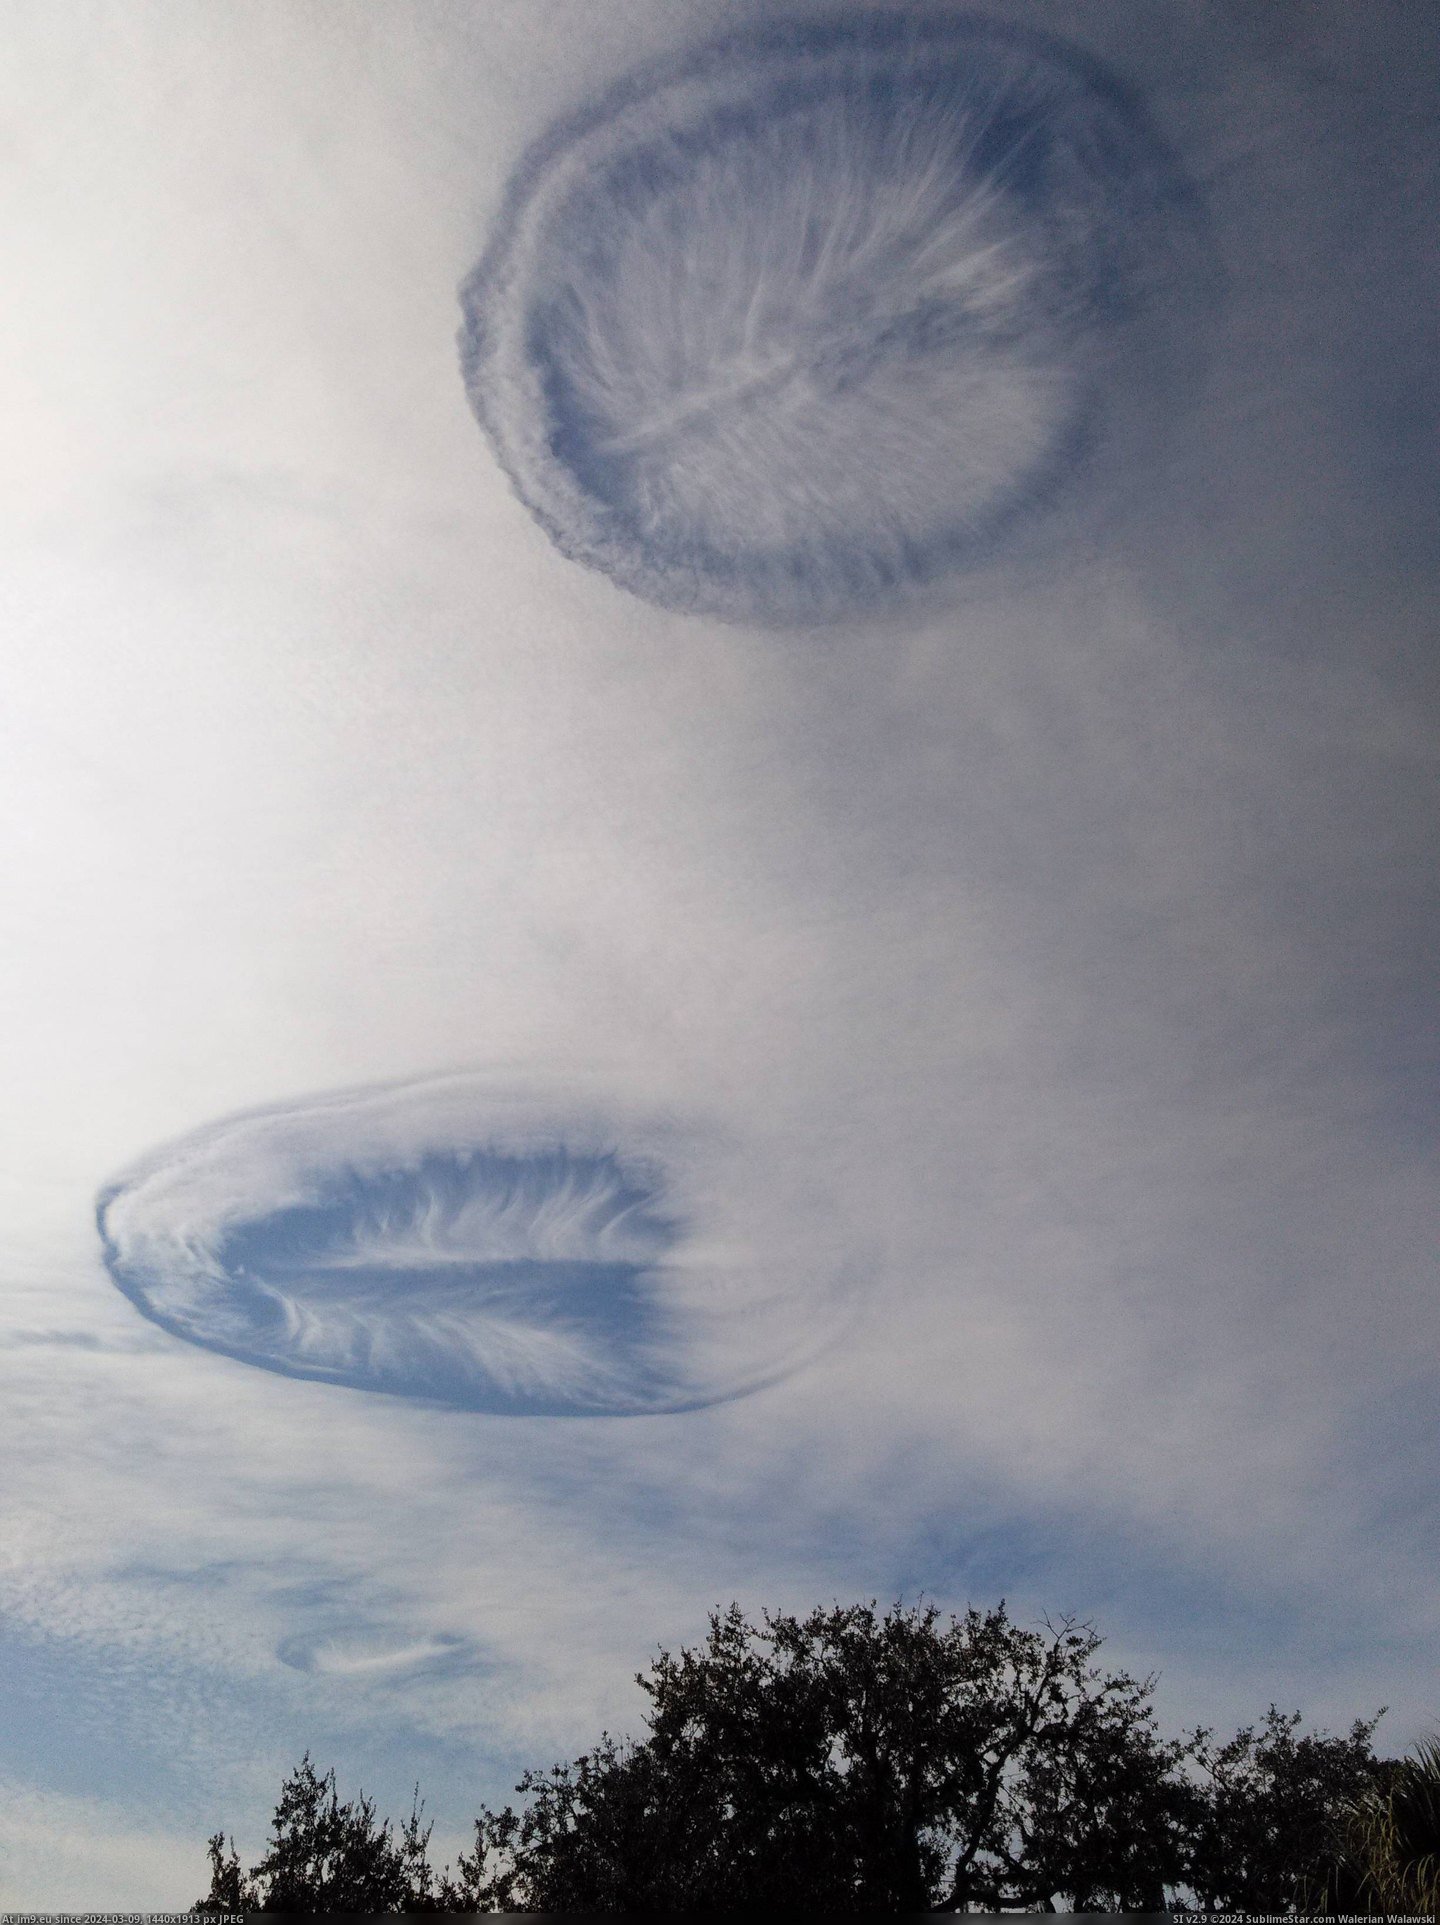 #Wtf #Hole #Florida #Central #Punch #Crazy #Clouds [Wtf] Crazy looking hole punch clouds over central Florida. Pic. (Obraz z album My r/WTF favs))